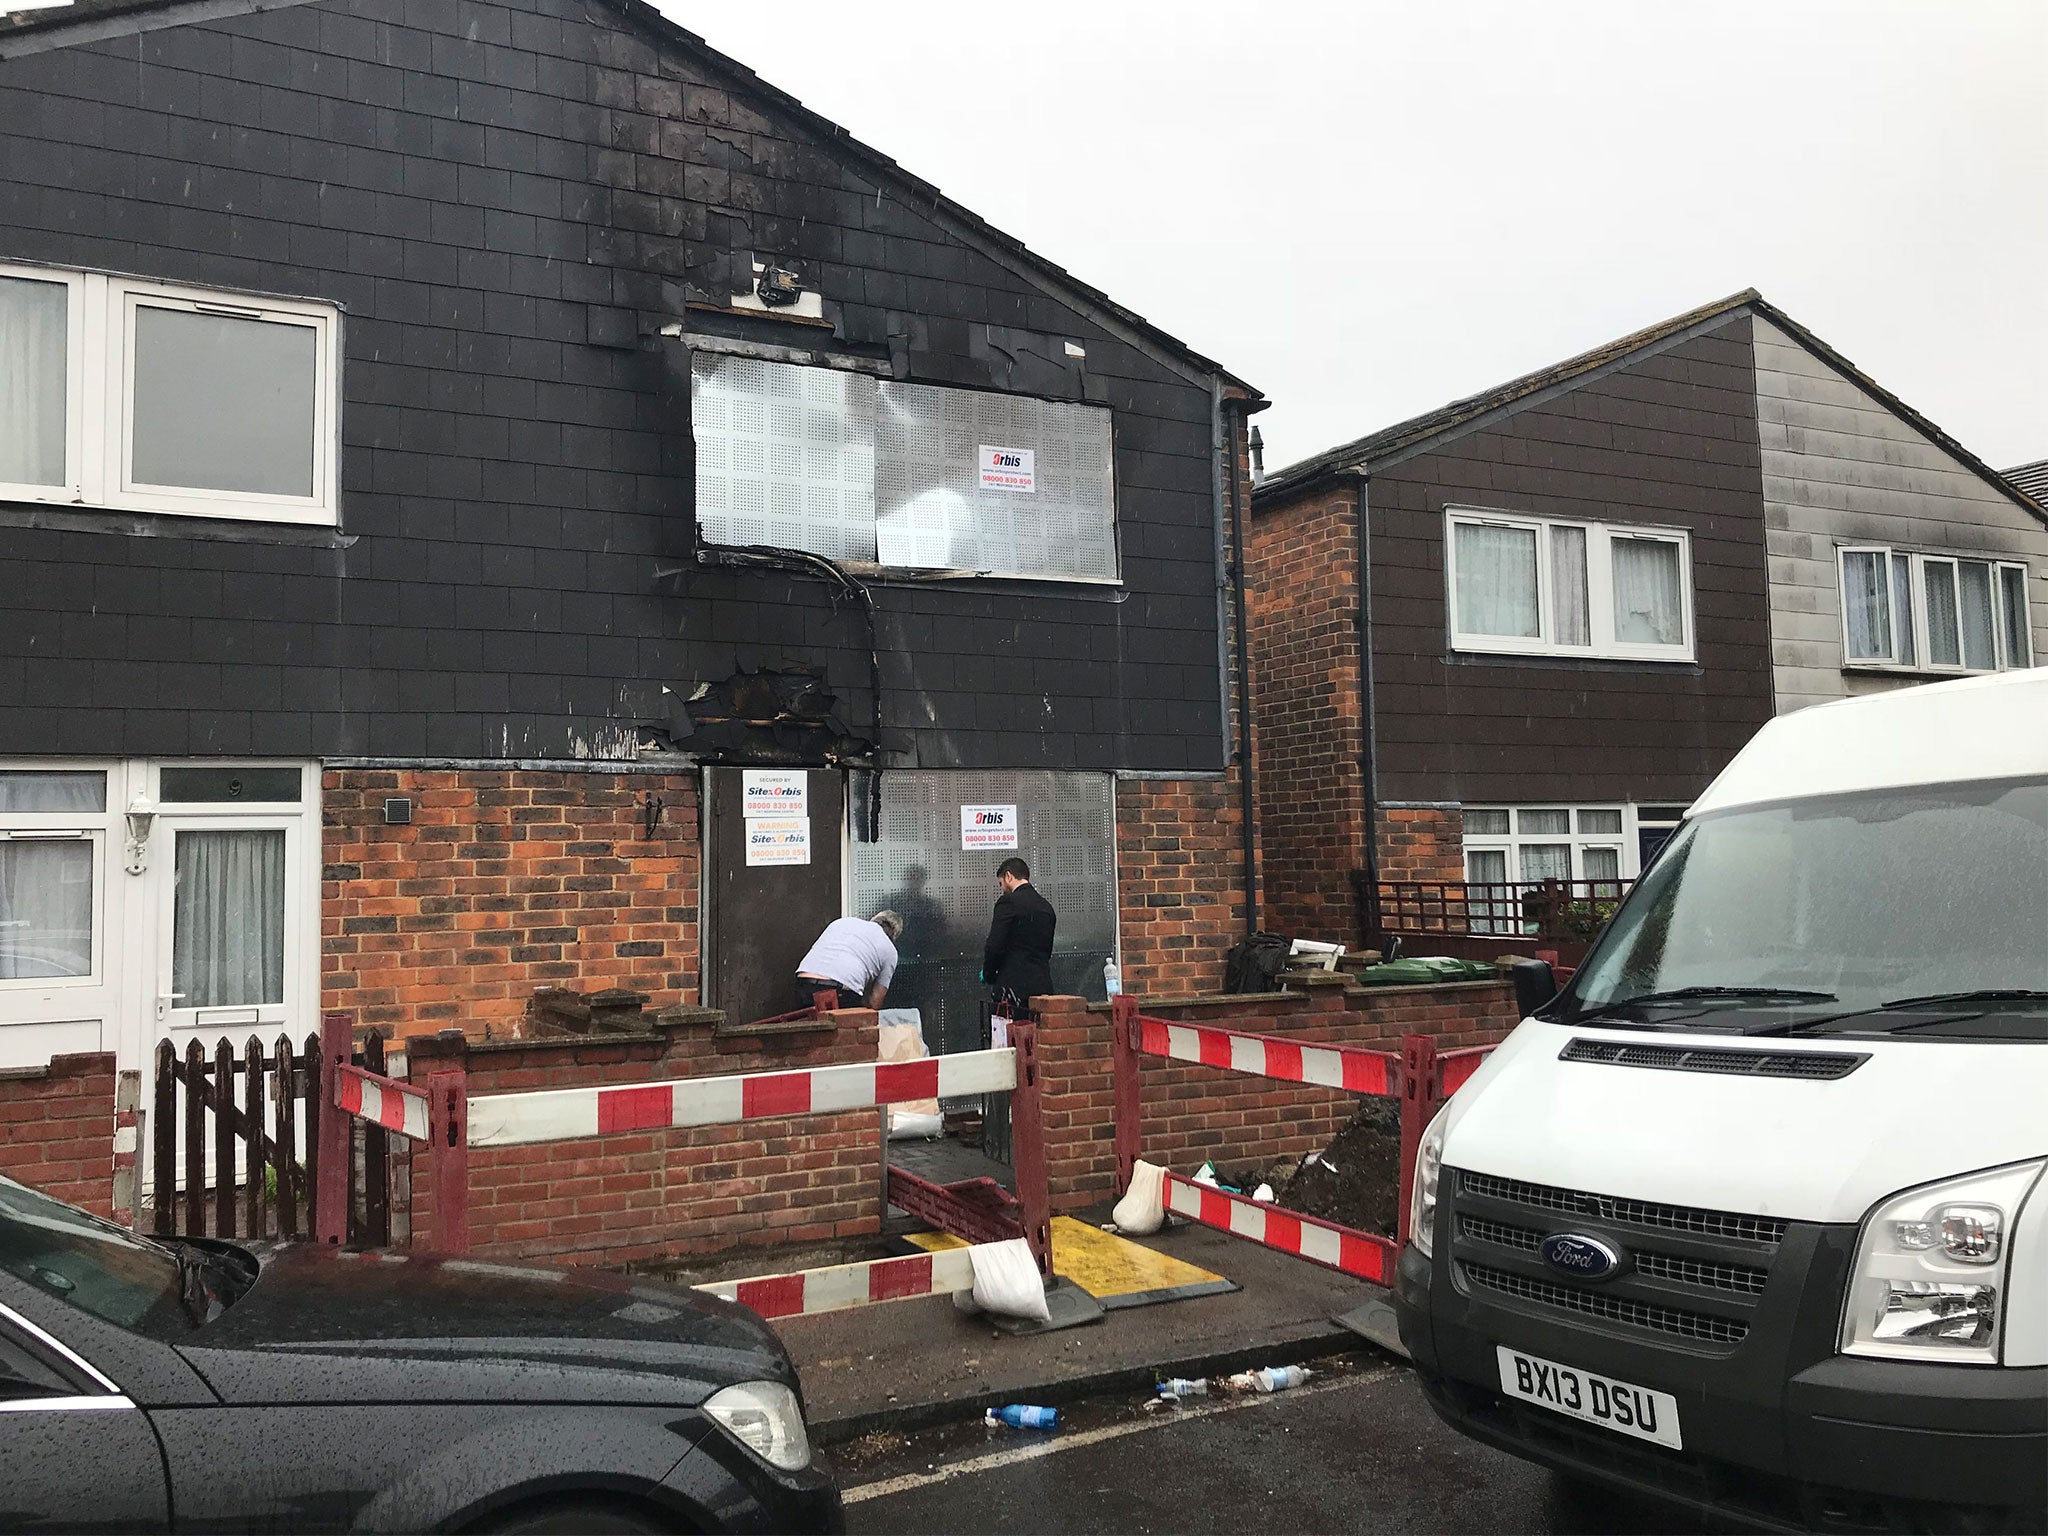 The Uhrie family's home remains boarded up following the fatal fire earlier this week